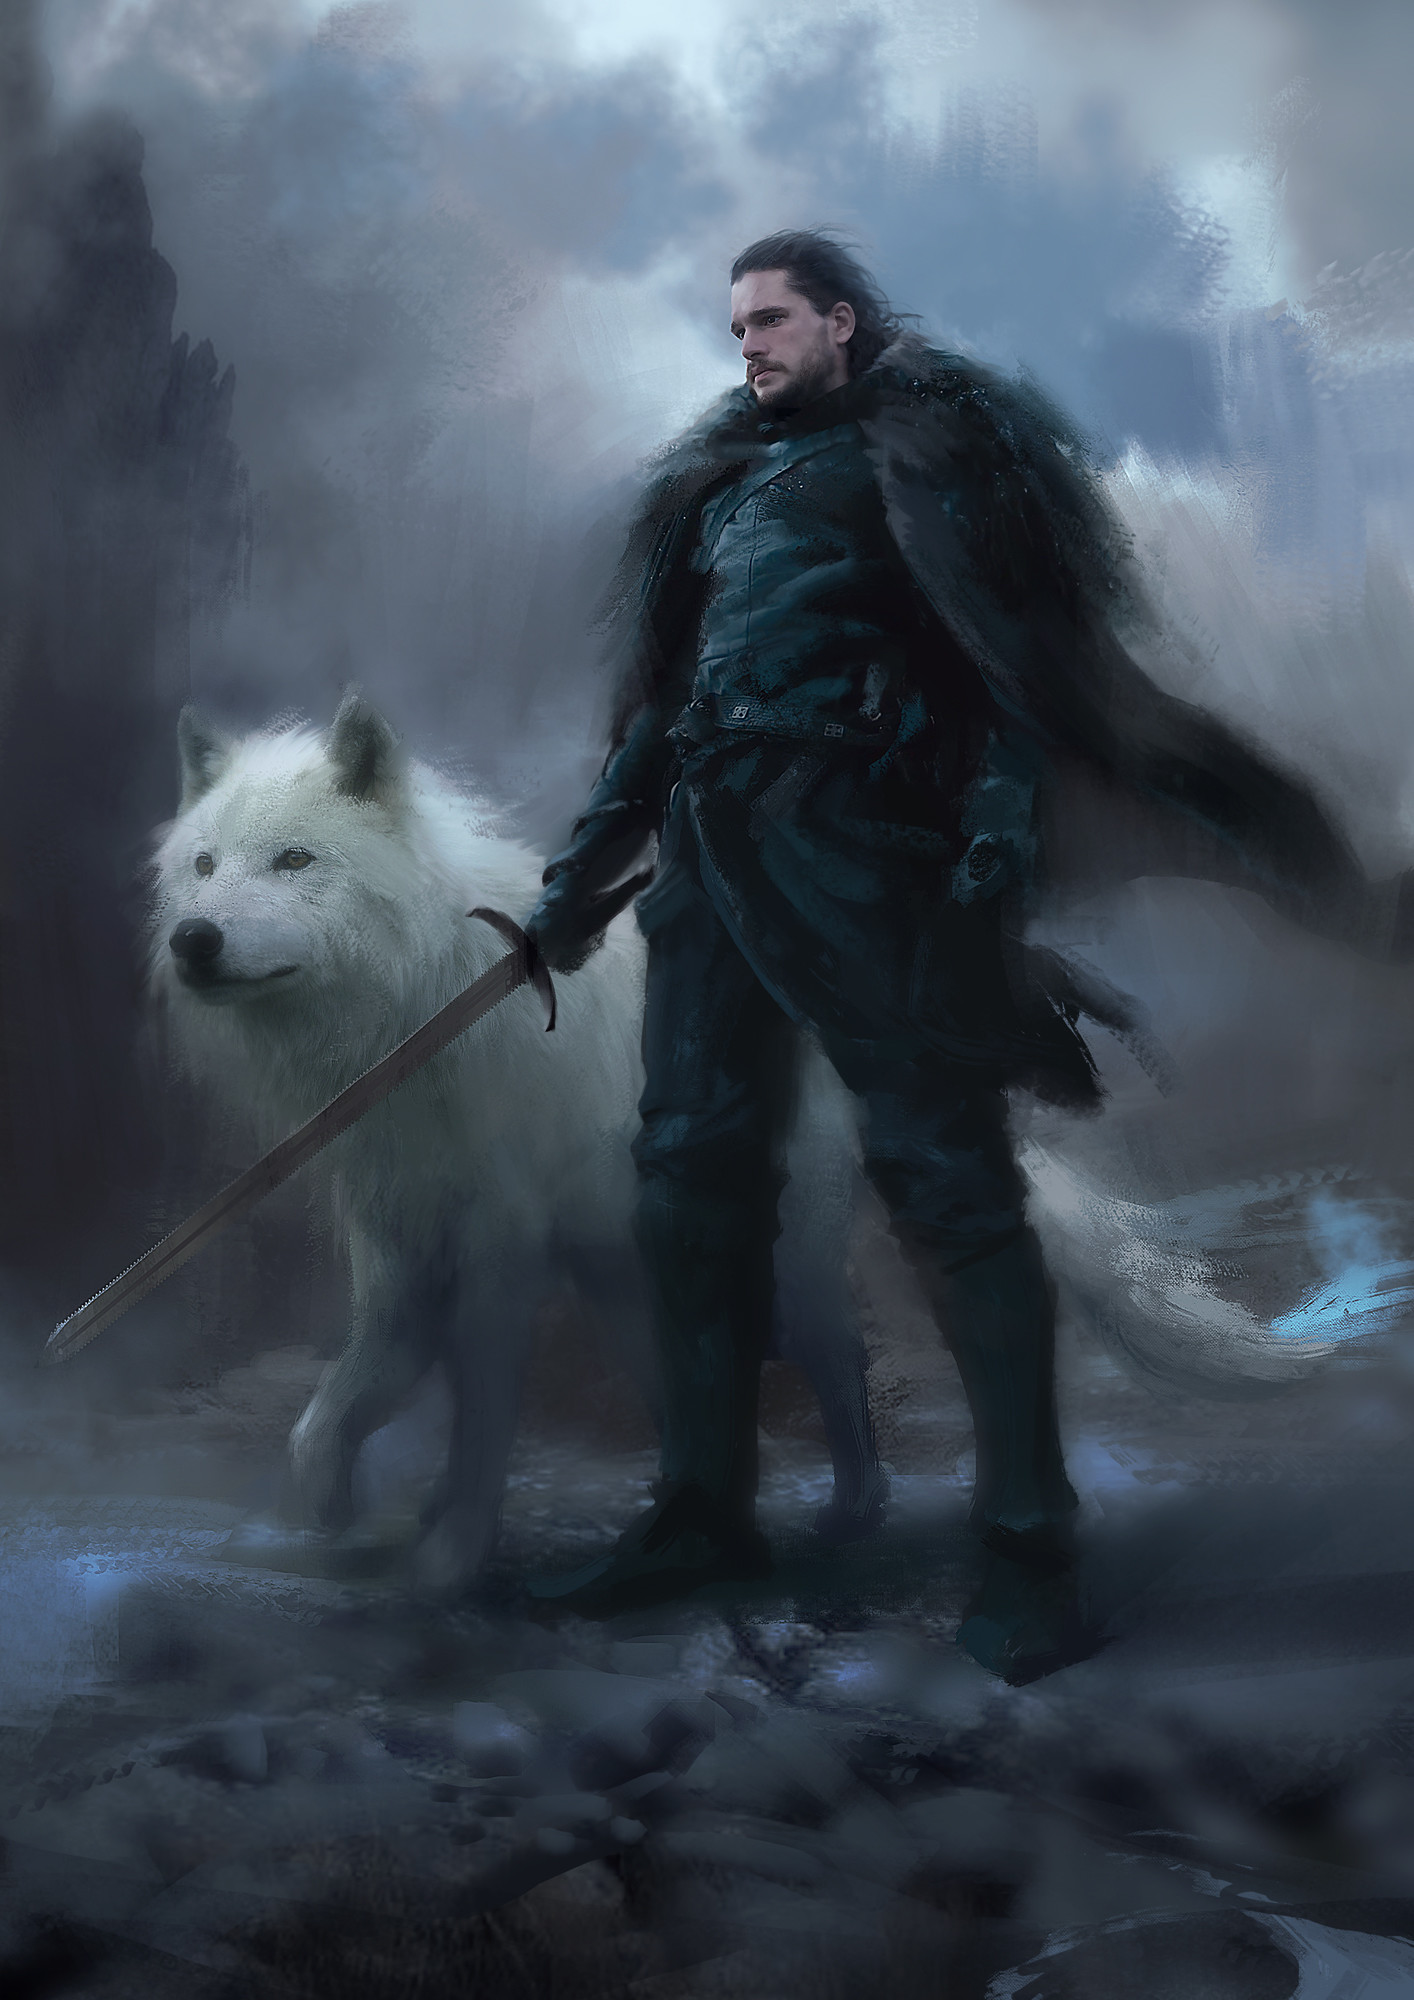 The King In The North Is A Sad, Beautiful Boy